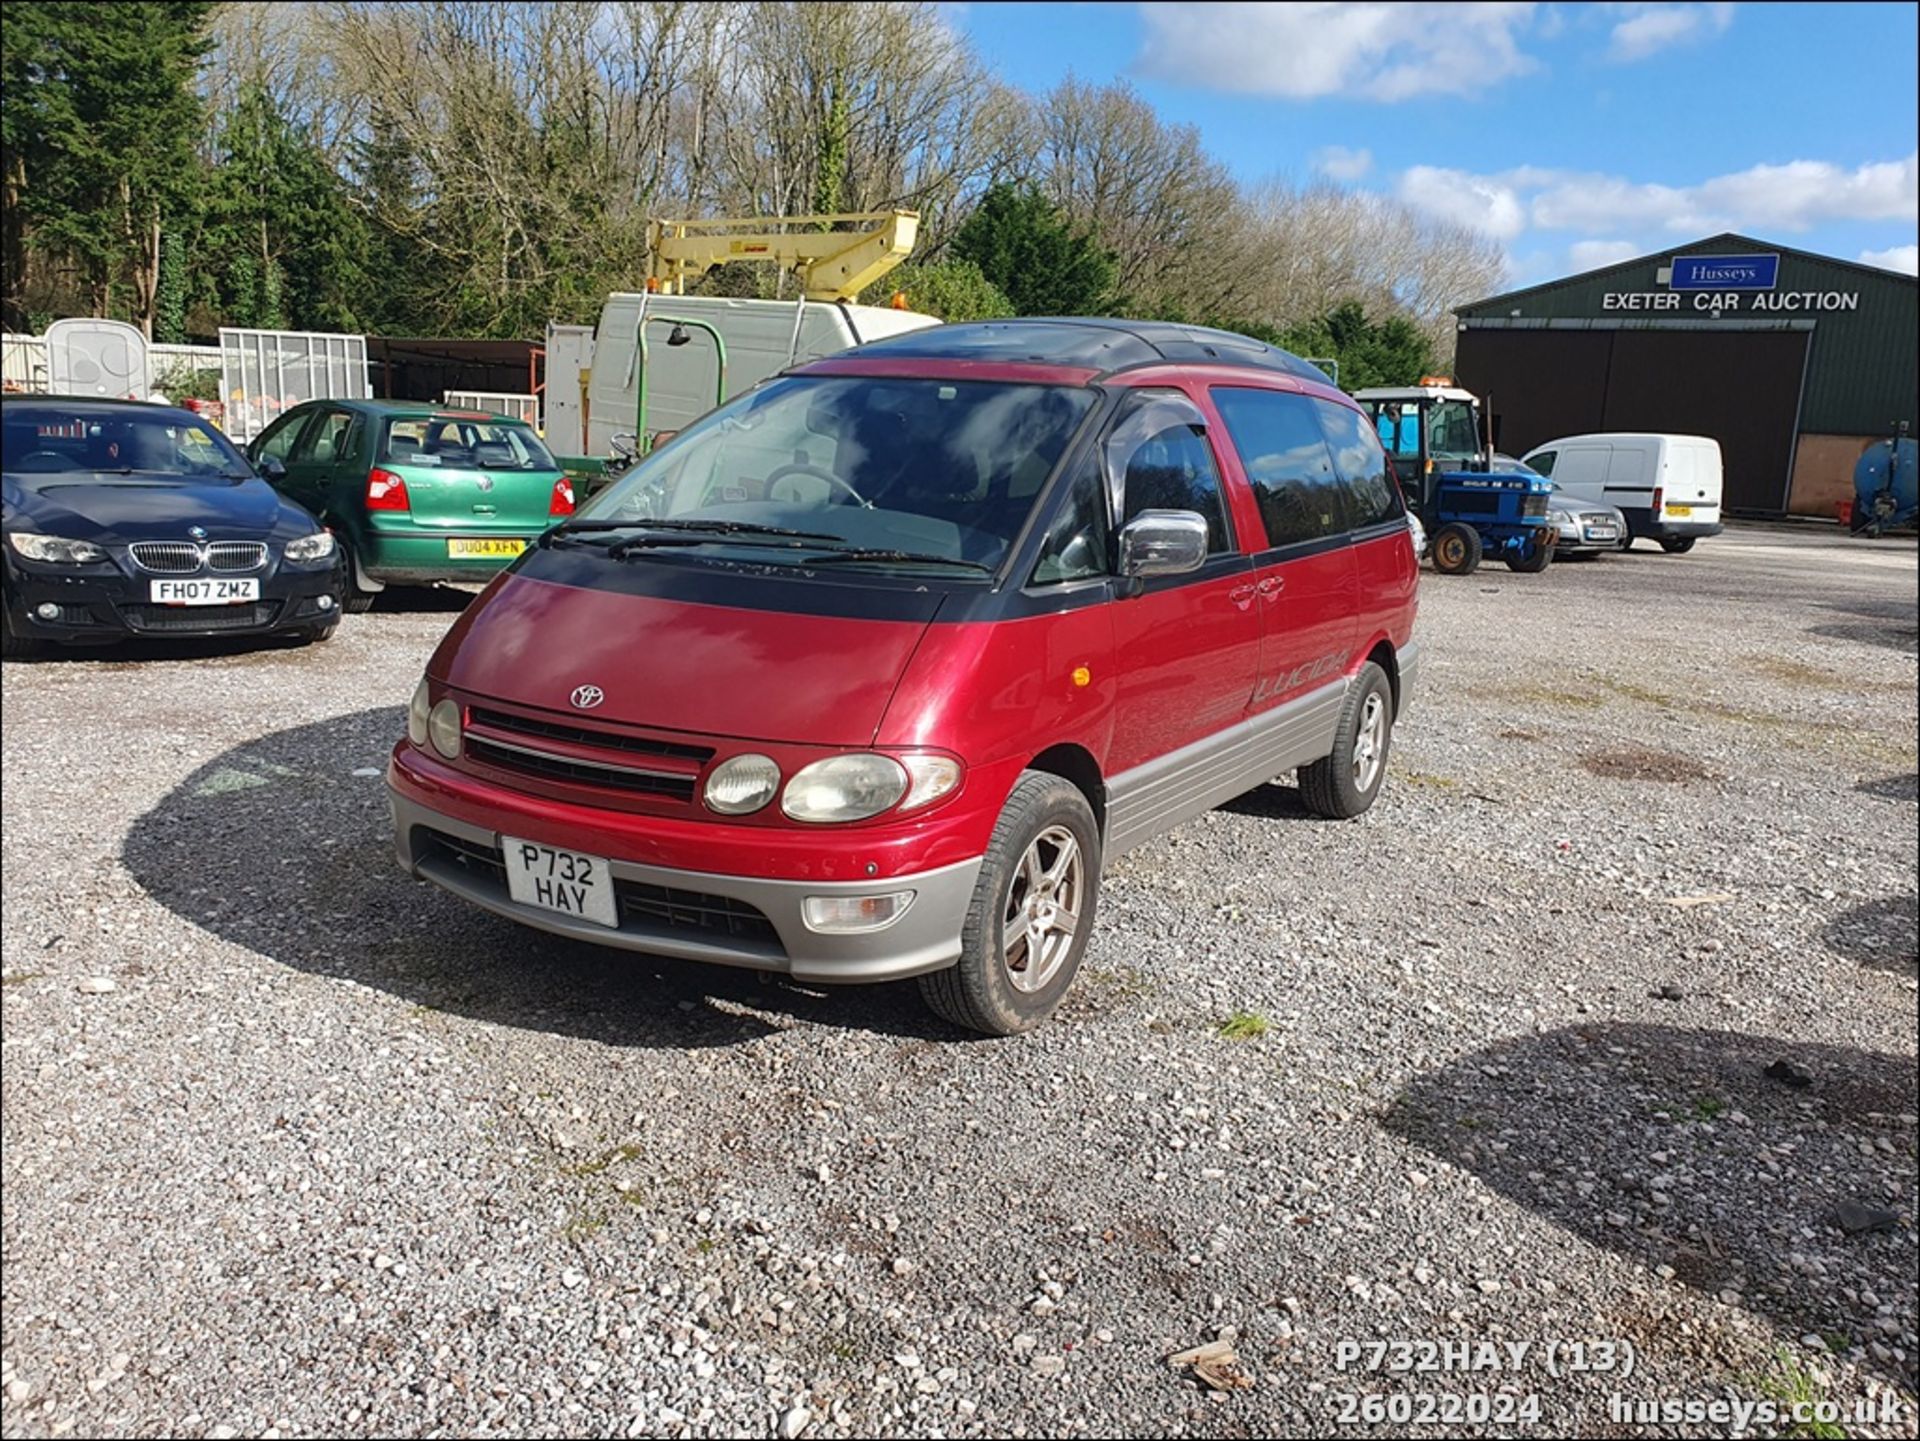 1997 TOYOTA LUCIDA - 2184cc 4dr Van (Red) - Image 14 of 22